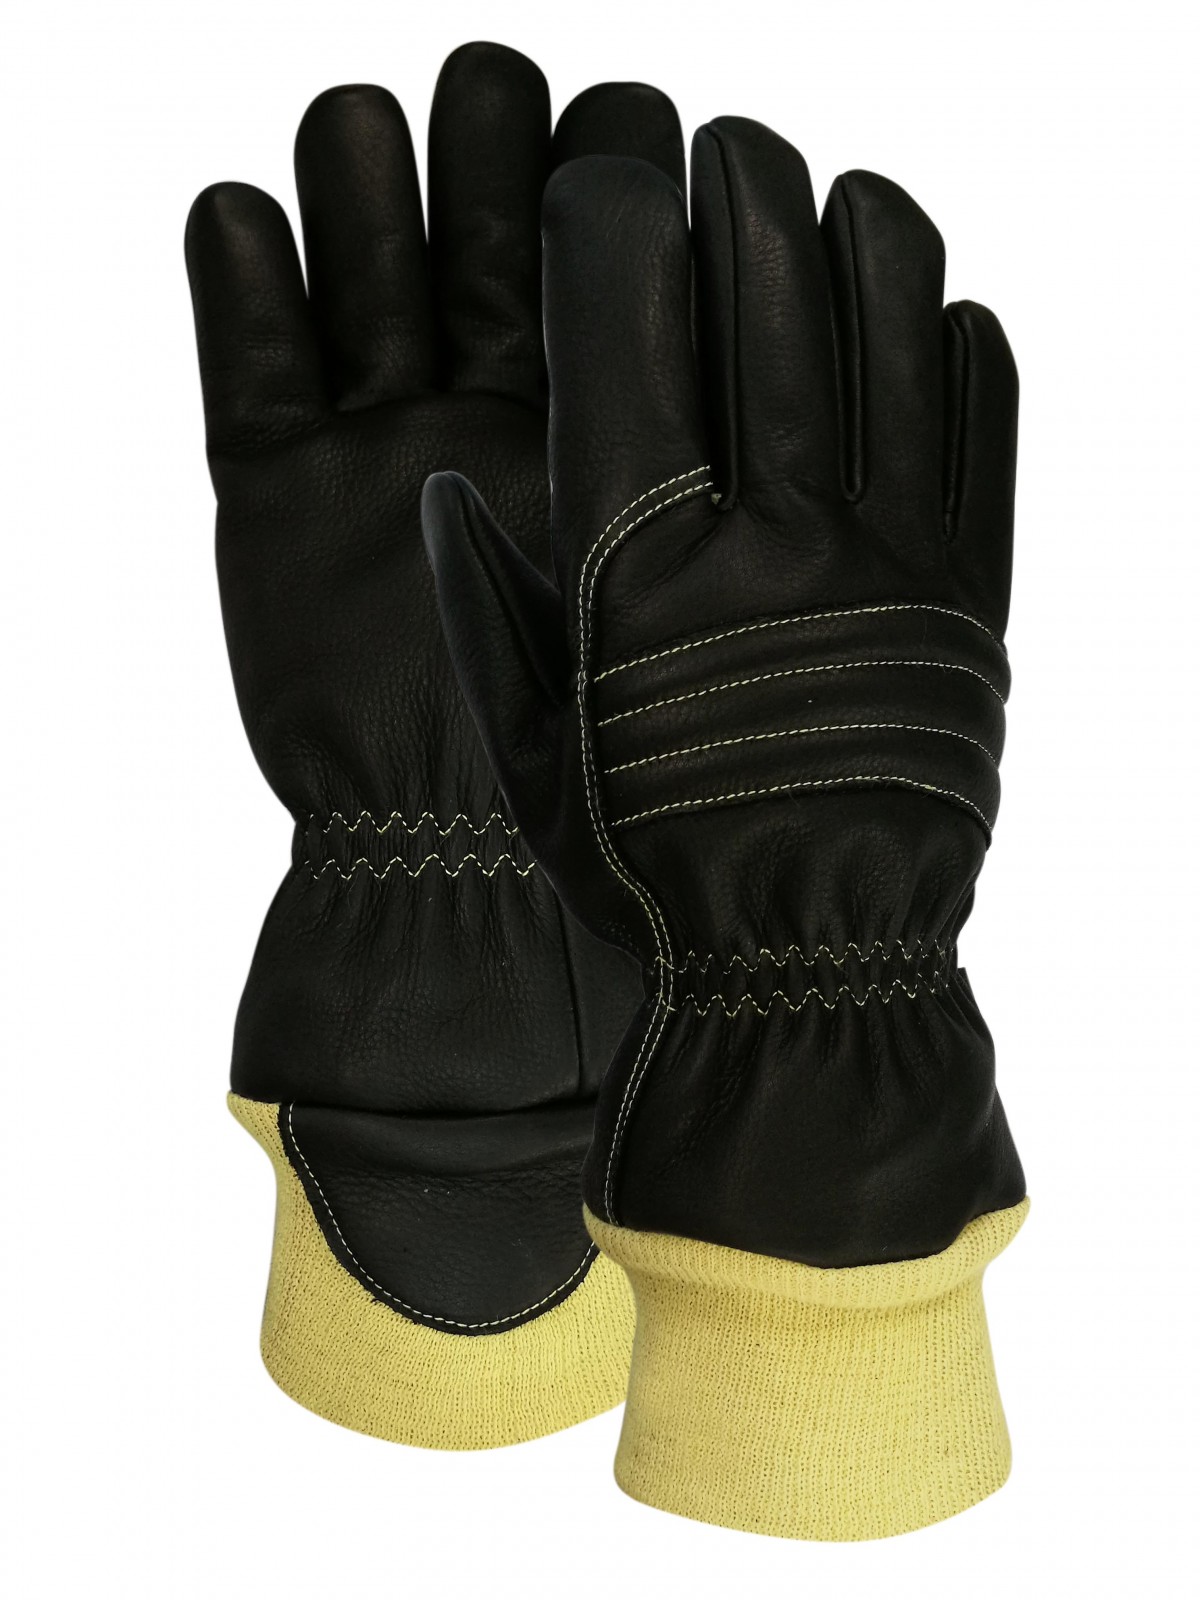 Five-fingered leather fireman's gloves article 7983